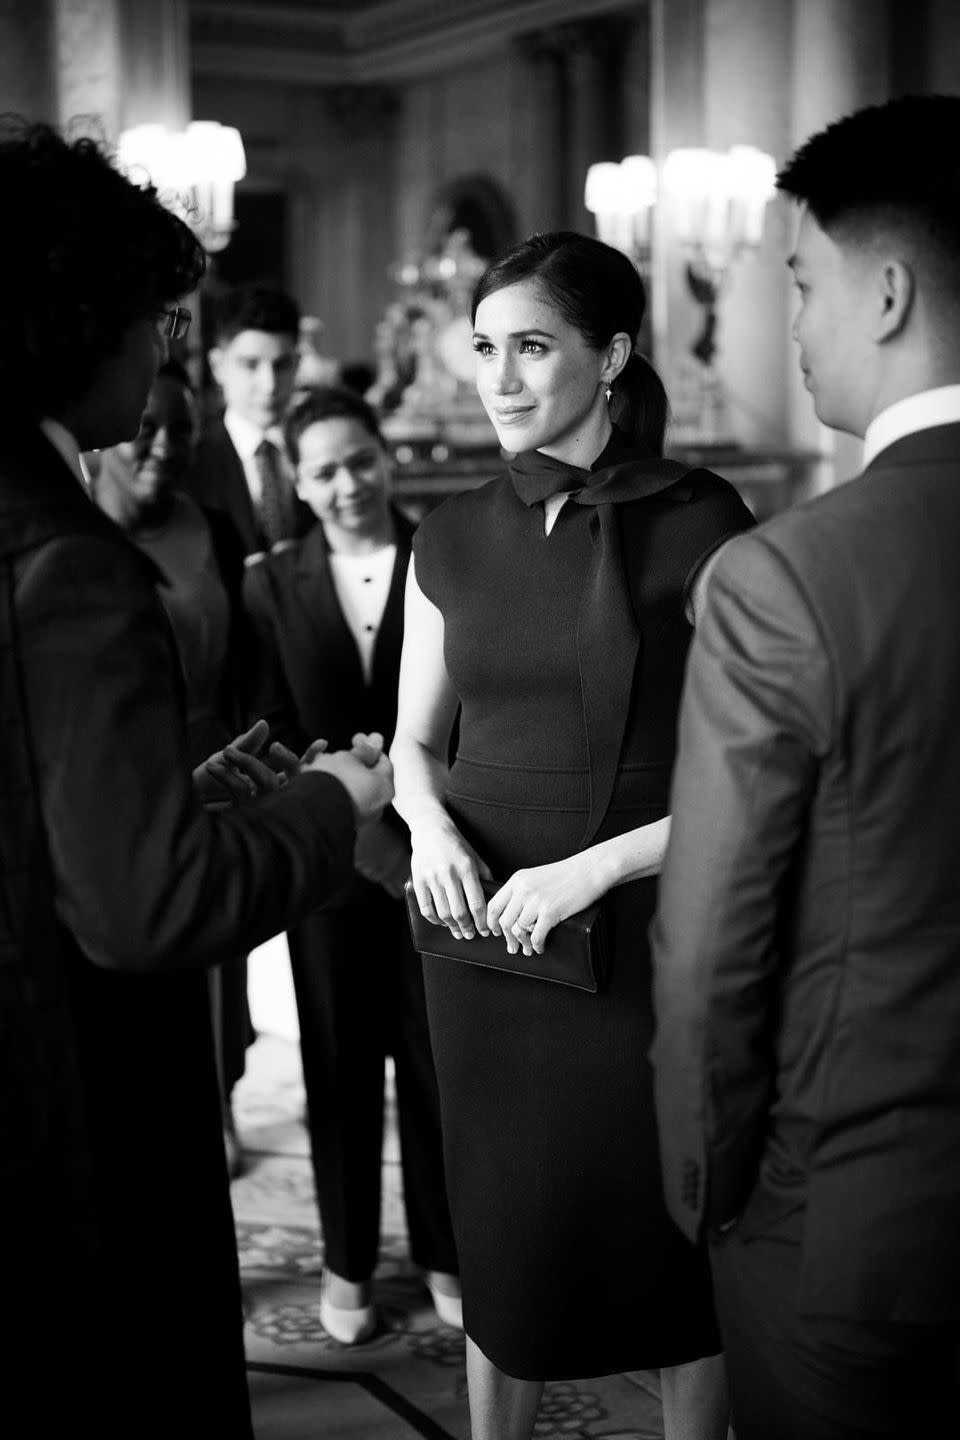 Photo credit: (c) The Duke and Duchess of Sussex/Chris Allerton 